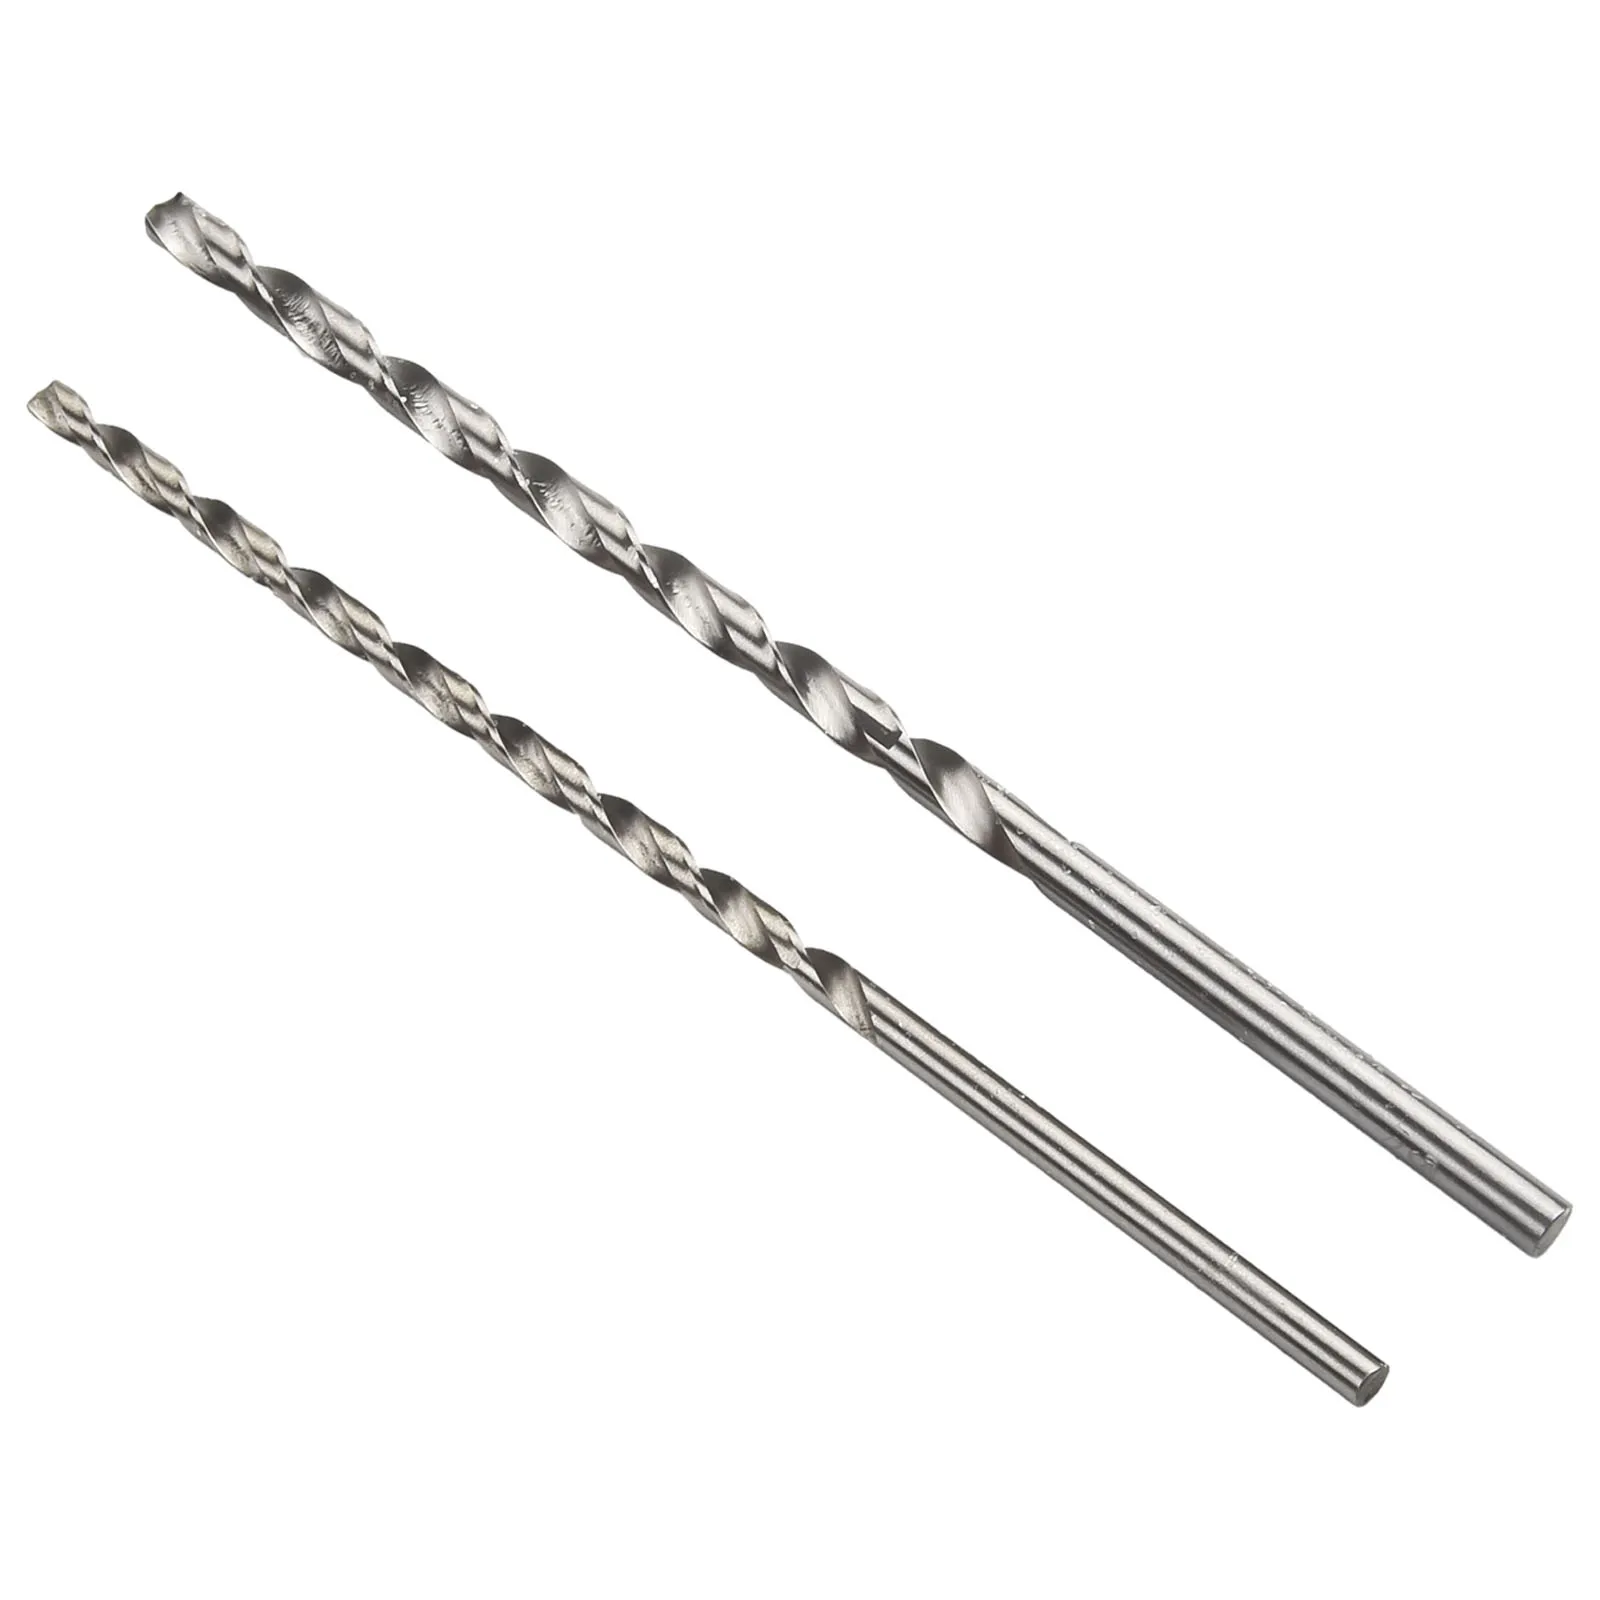 

Drilling Machines Drill Bit Electric Drill 4mm 5mm Accessories Extra Long High Speed Steel Parts Silver 10PCS 2mm